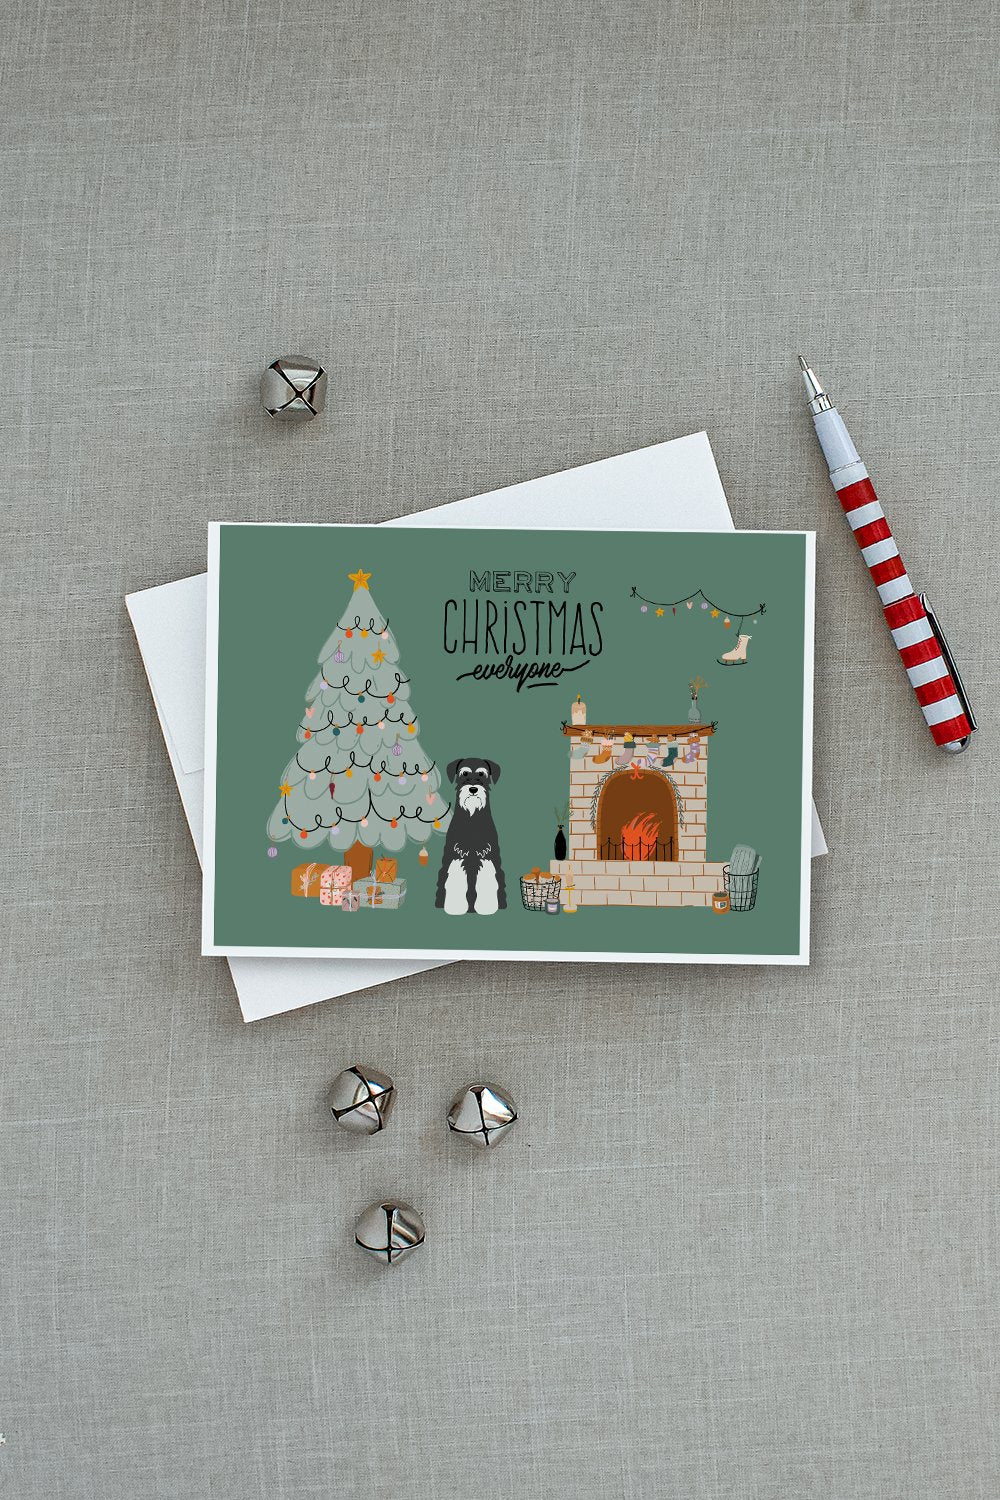 Salt and Pepper Standard Schnauzer Christmas Everyone Greeting Cards and Envelopes Pack of 8 - the-store.com